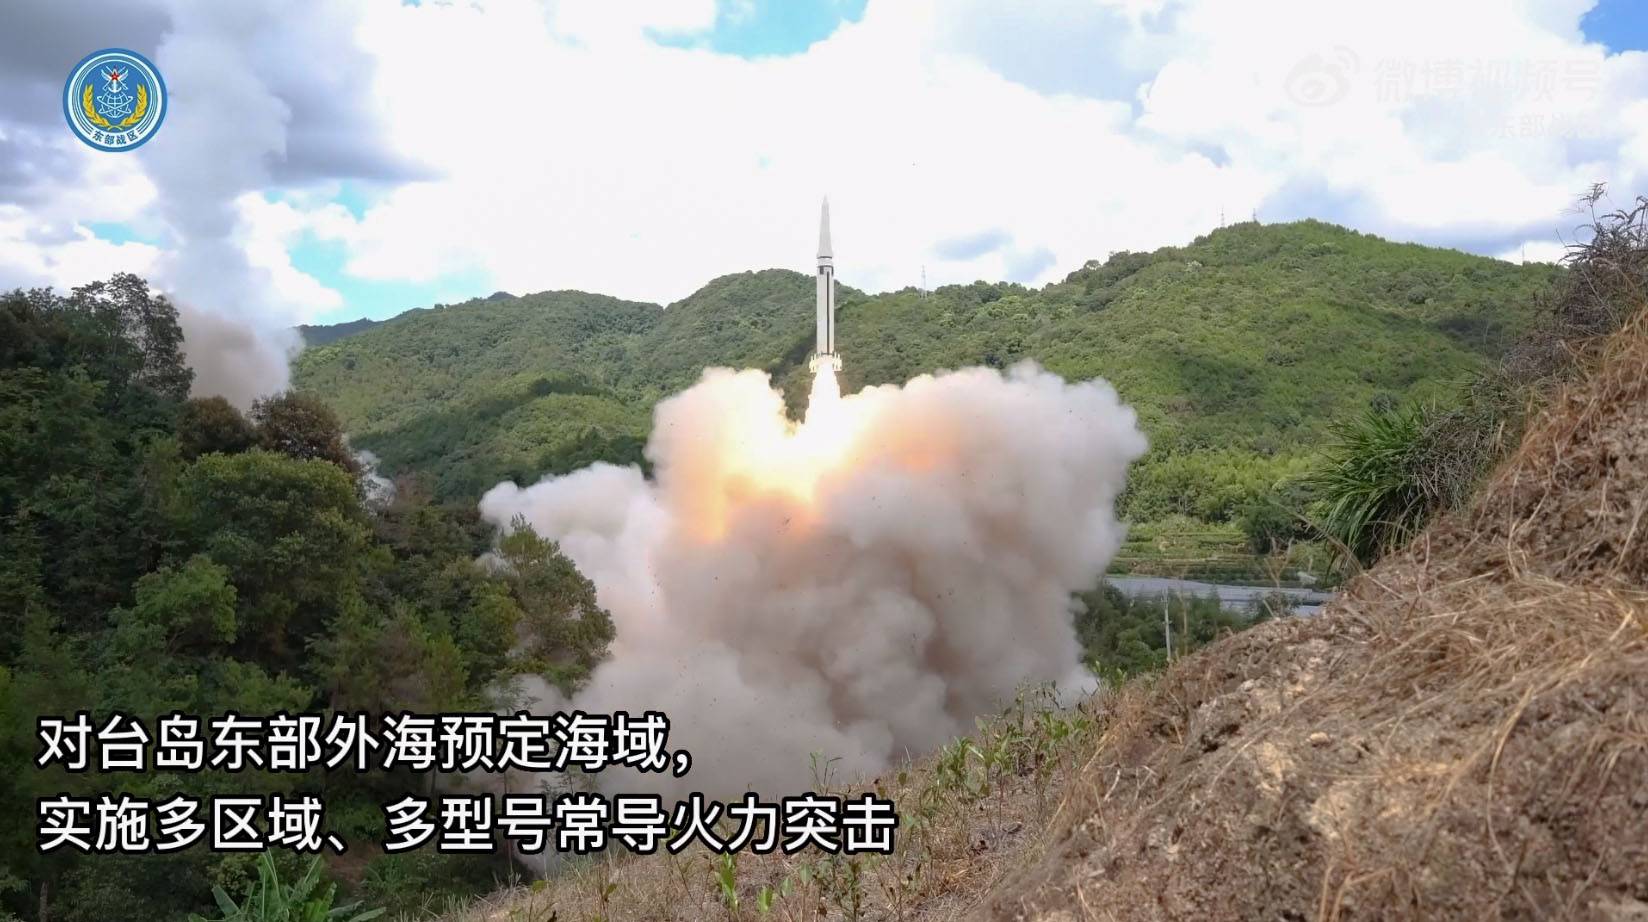 A screenshot of a video posted on Weibo shows a Dongfeng ballistic missile launched by the Chinese People’s Liberation Army on Thursday. | KYODO